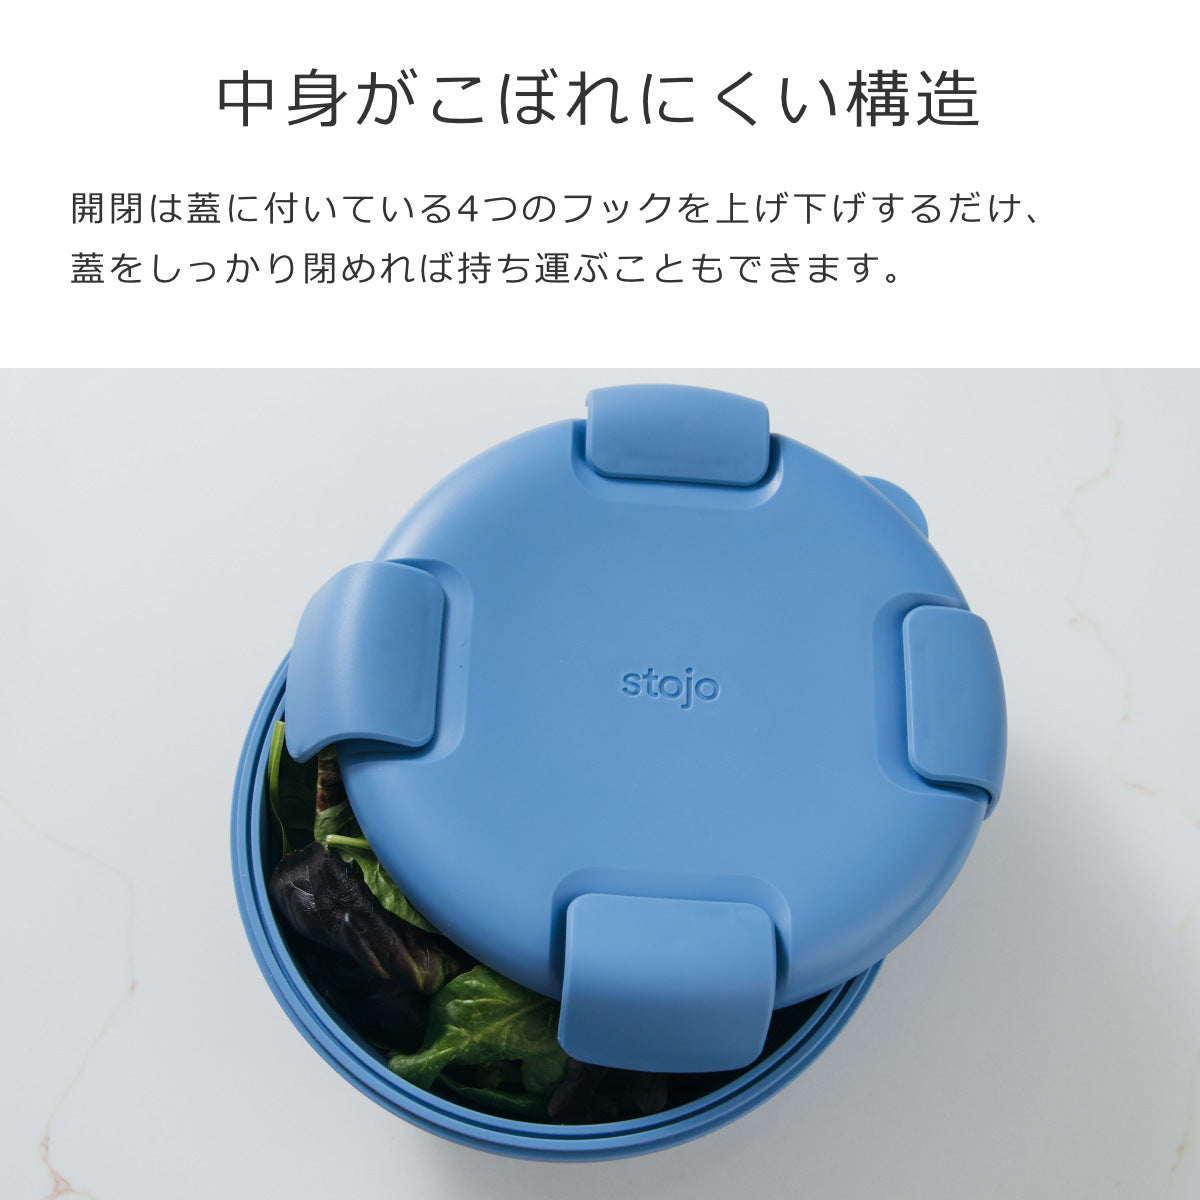 stojo Collapsible Bowl (折りたたみボウル) 1.1L Cashmere